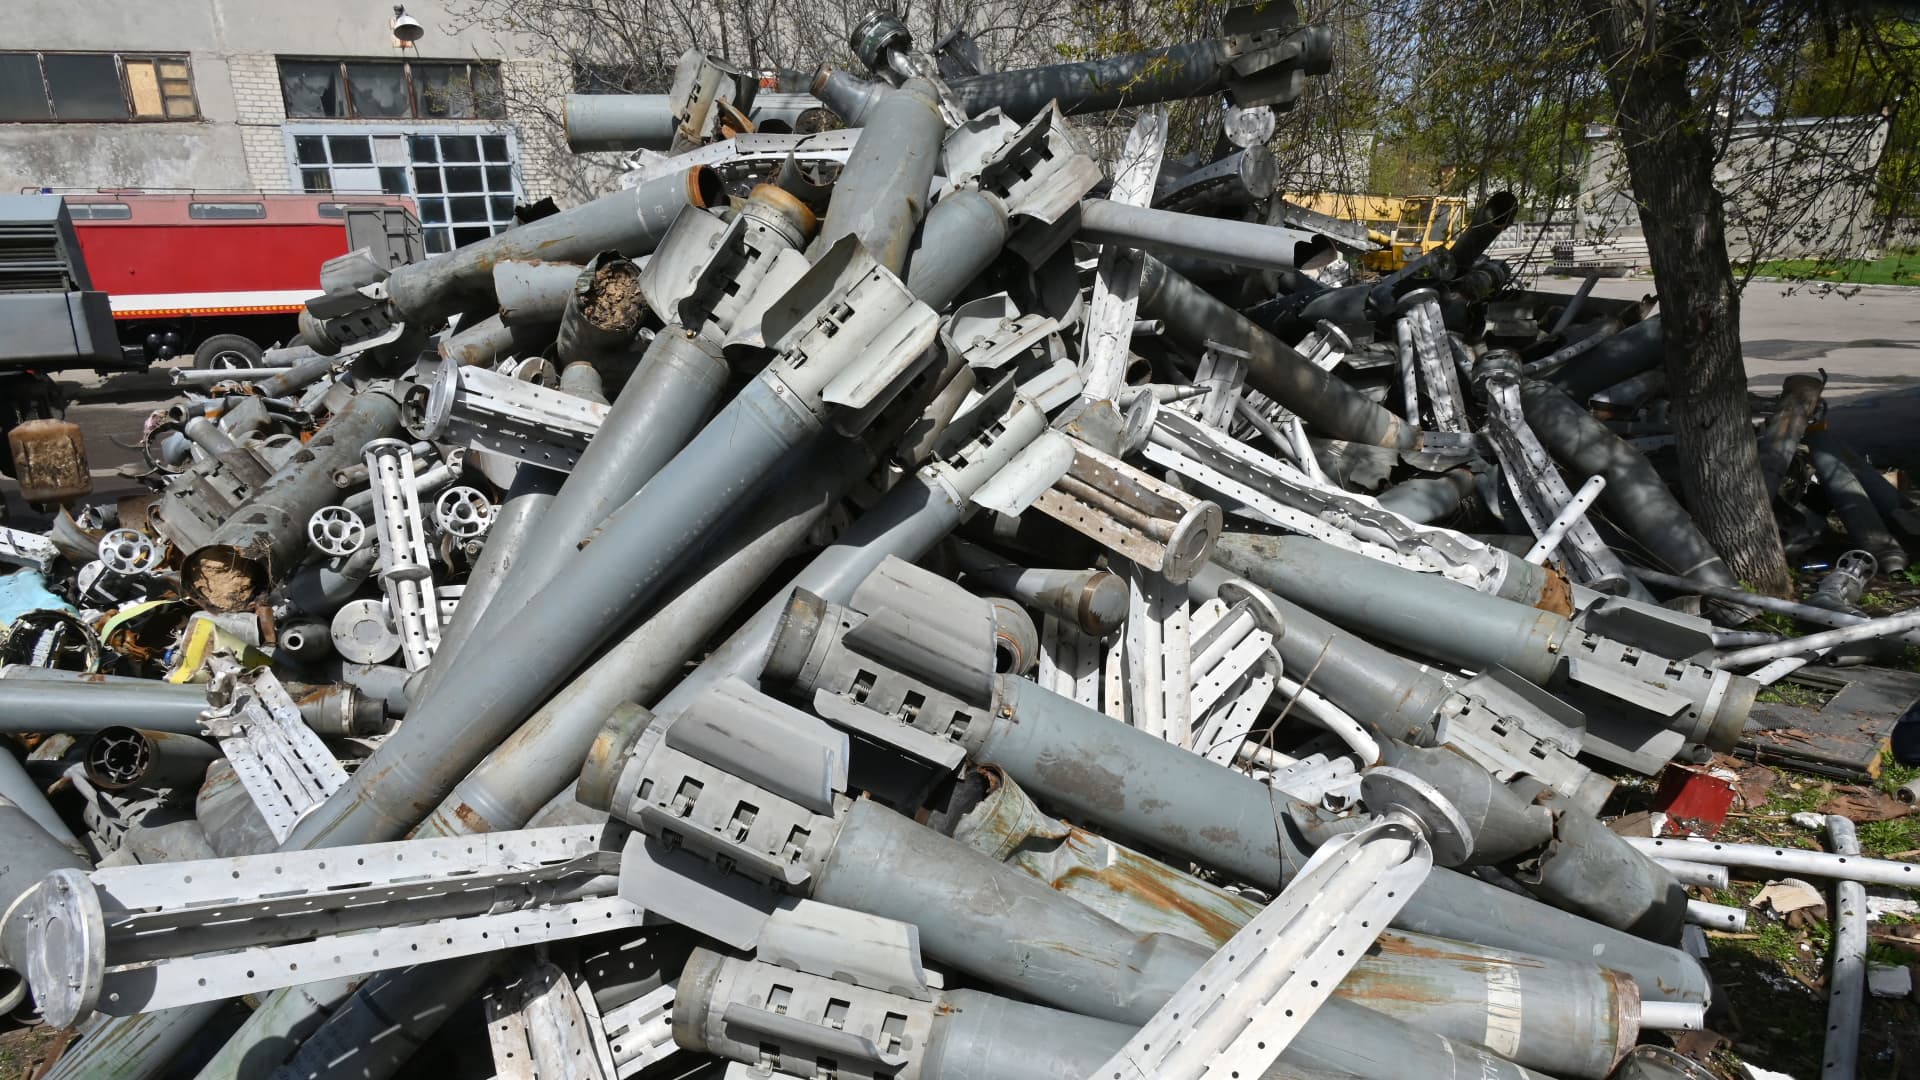 A photograph taken on April 25, 2022 shows a pile of missile remains, collected by members of the State Emergency Service of Ukraine after shellings in Kharkiv, amid the Russian invasion of Ukraine.